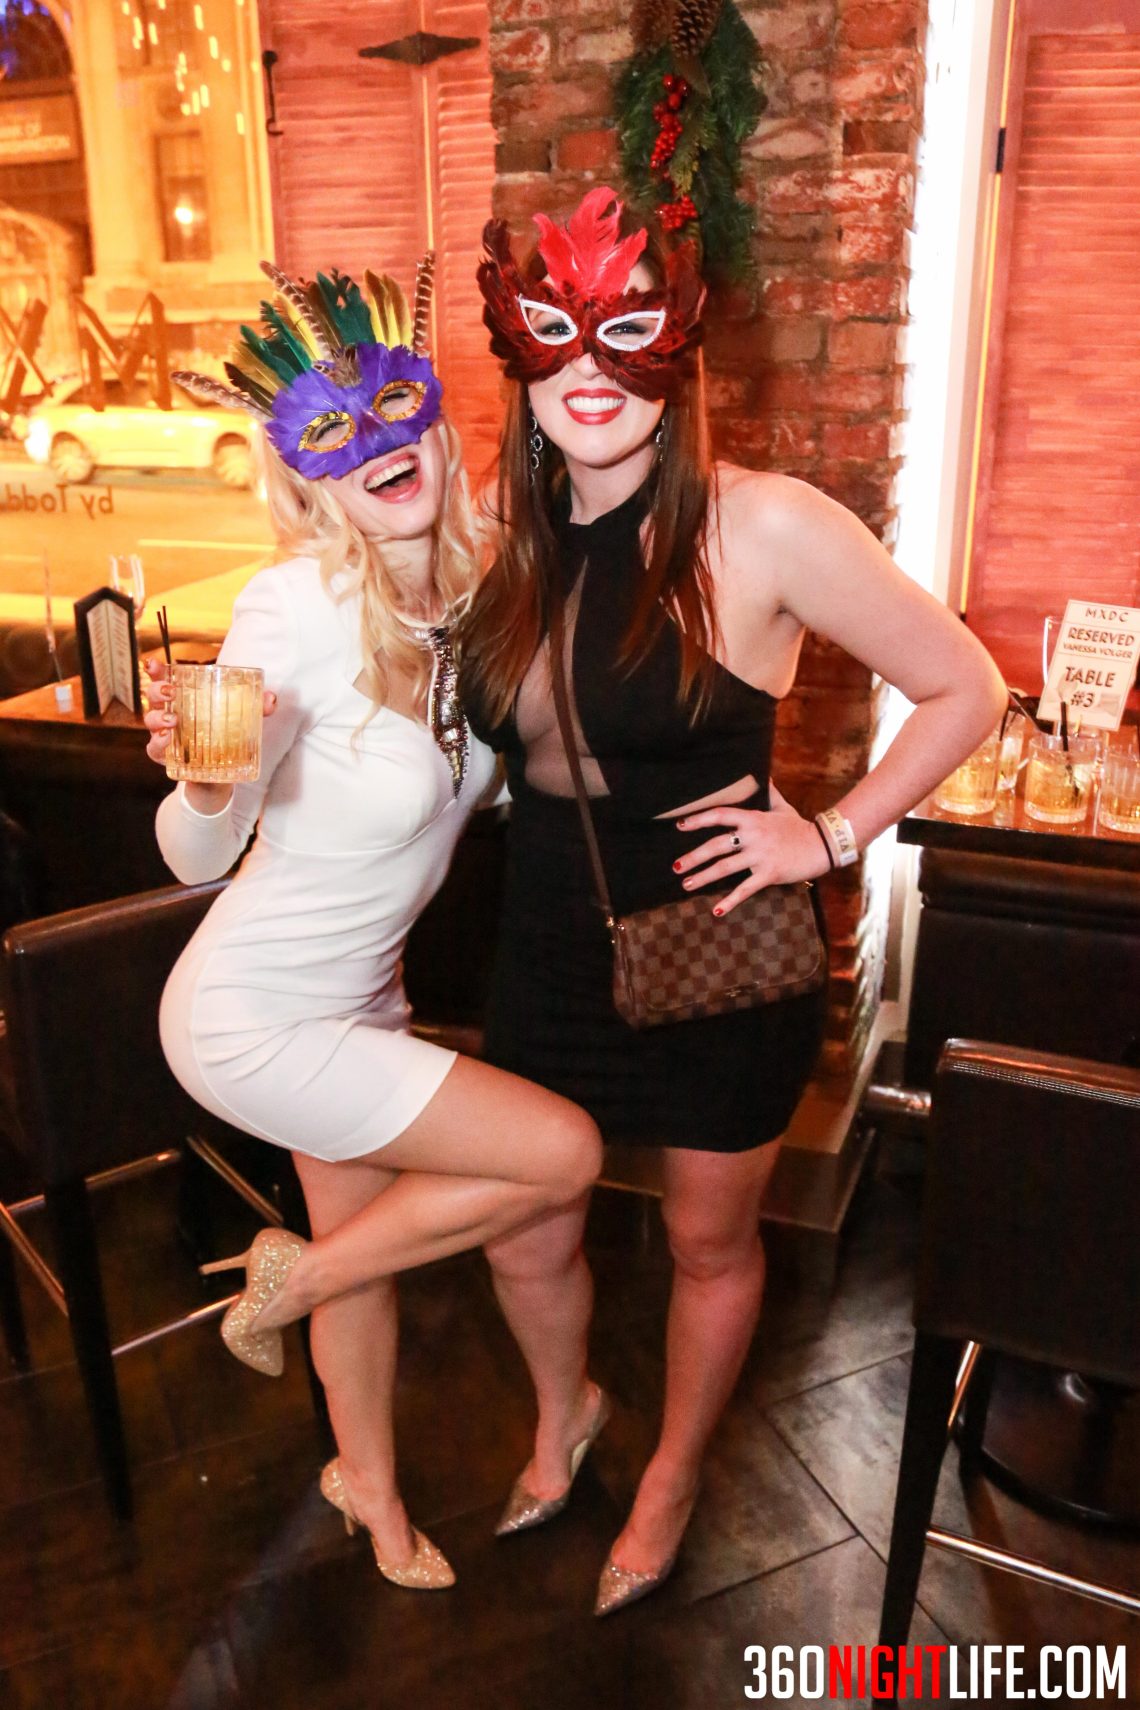 2 young women at the National New Years Eve Masquerade Ball in Washington DC. They have colorful masks on with feathers. This was at an event hosted by 360 Nightlife and its a very famous NYE party.